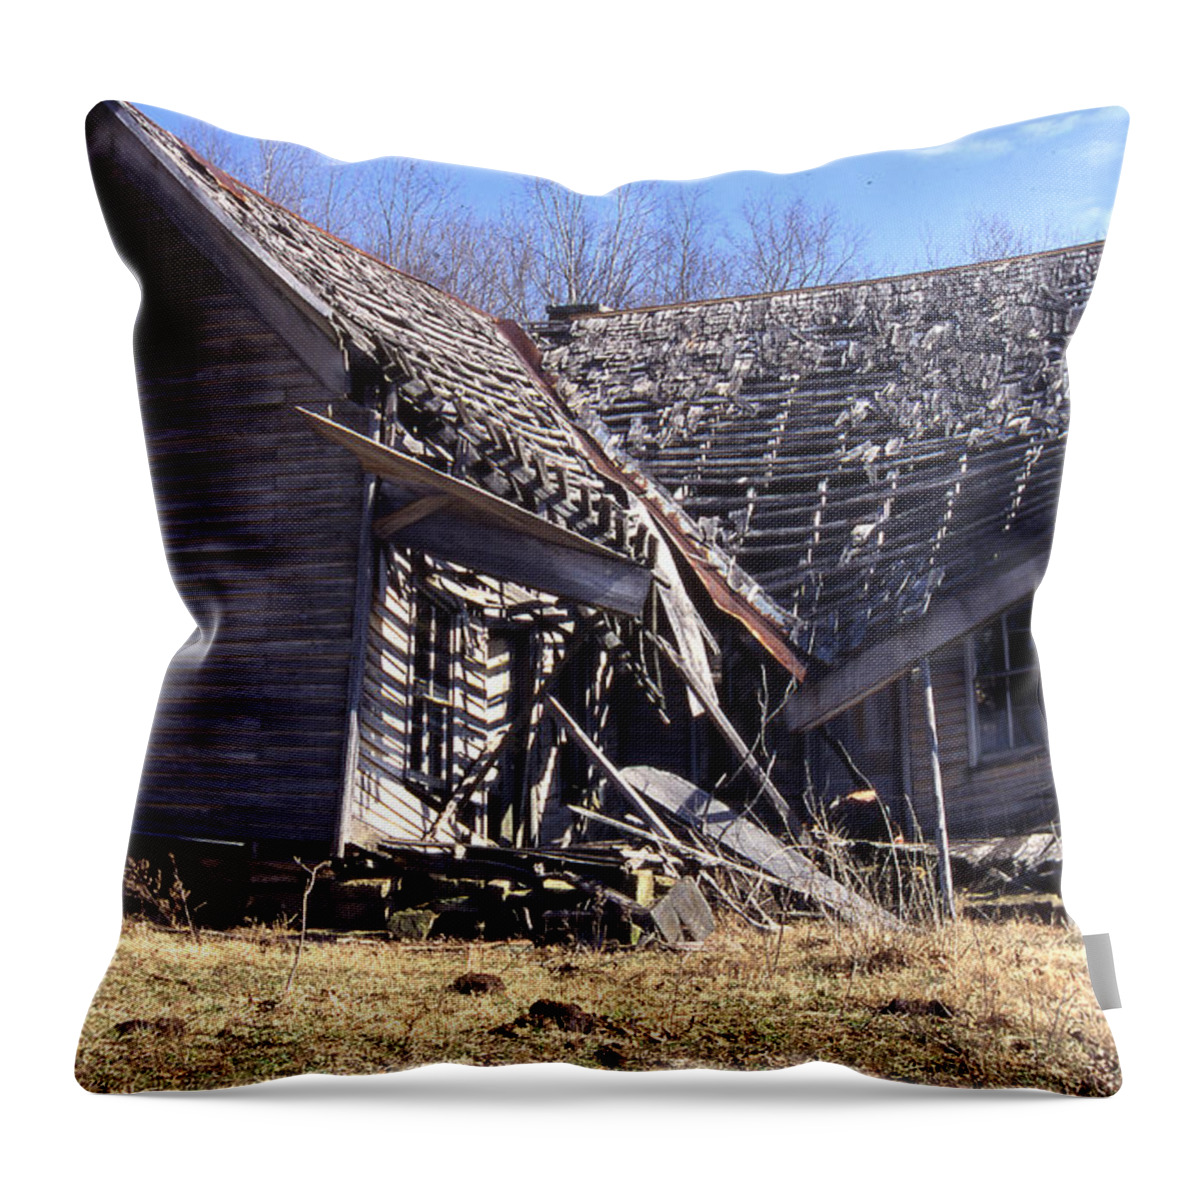  Throw Pillow featuring the photograph Old House b by Curtis J Neeley Jr